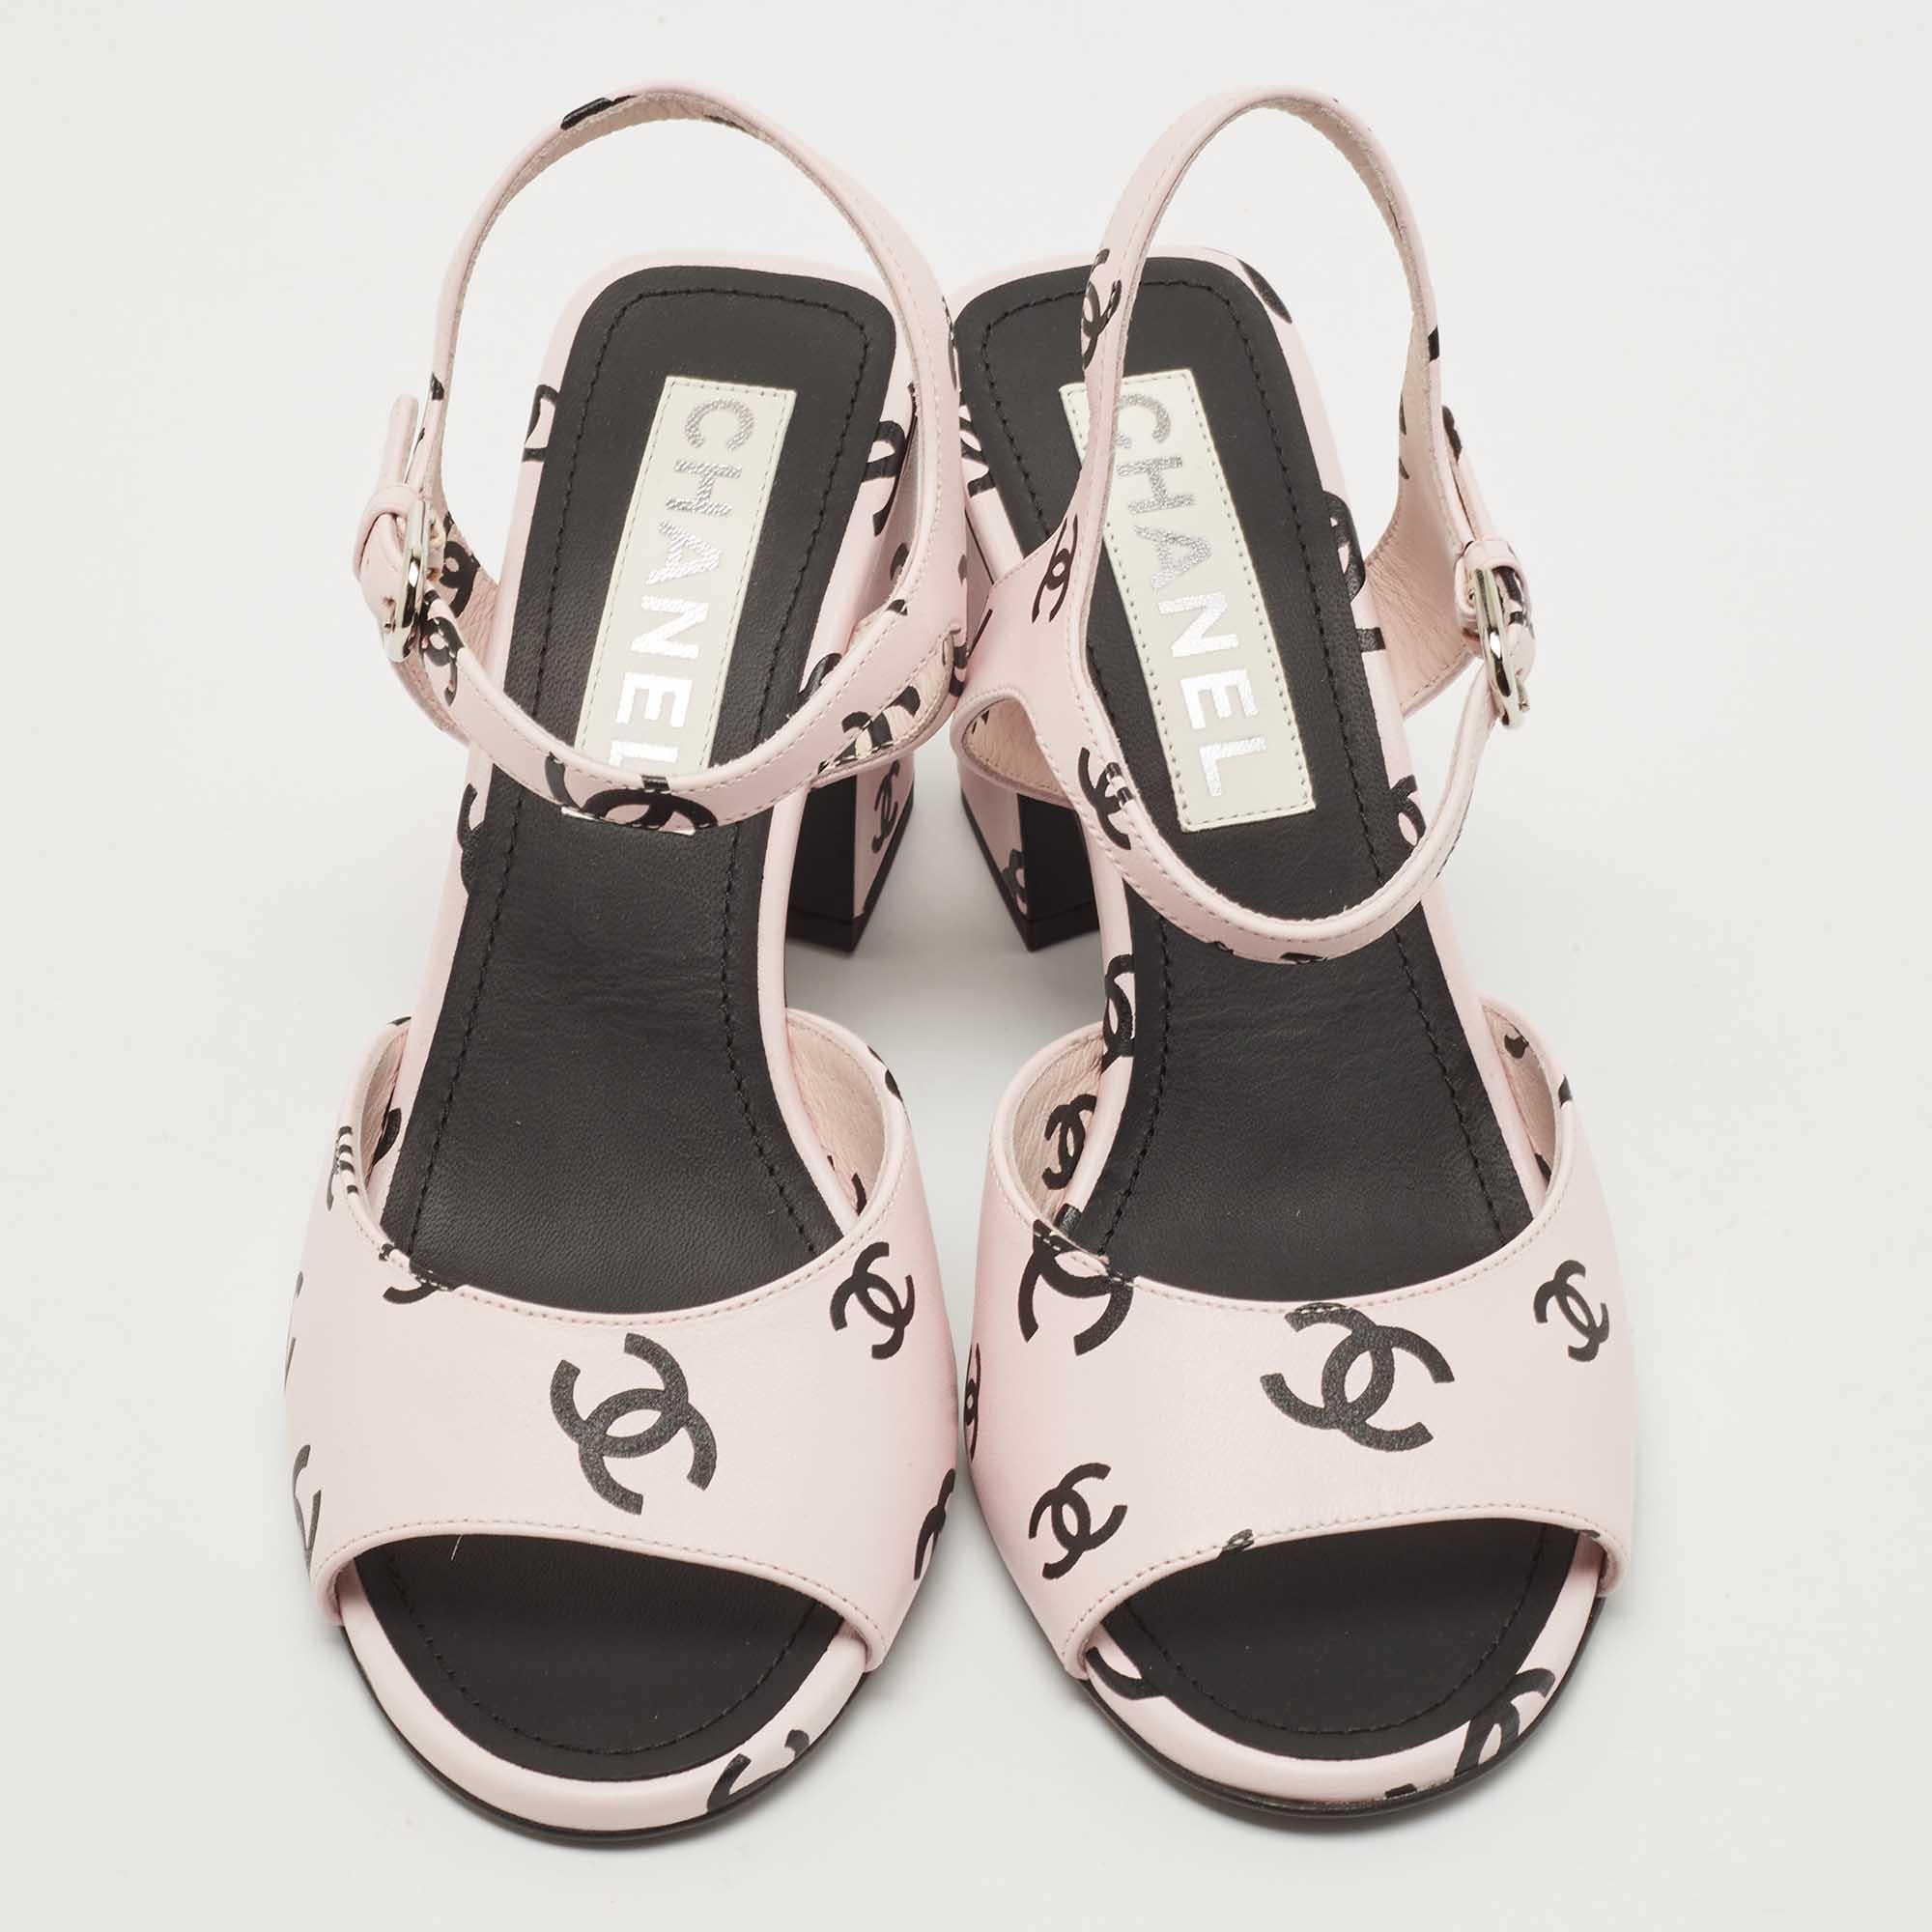 These heeled sandals are the perfect combination of style and comfort, with a sleek design that adds a touch of elegance to any outfit. The sturdy heel offers stability, while the soft straps ensure a comfortable fit. Ideal for many occasions, these